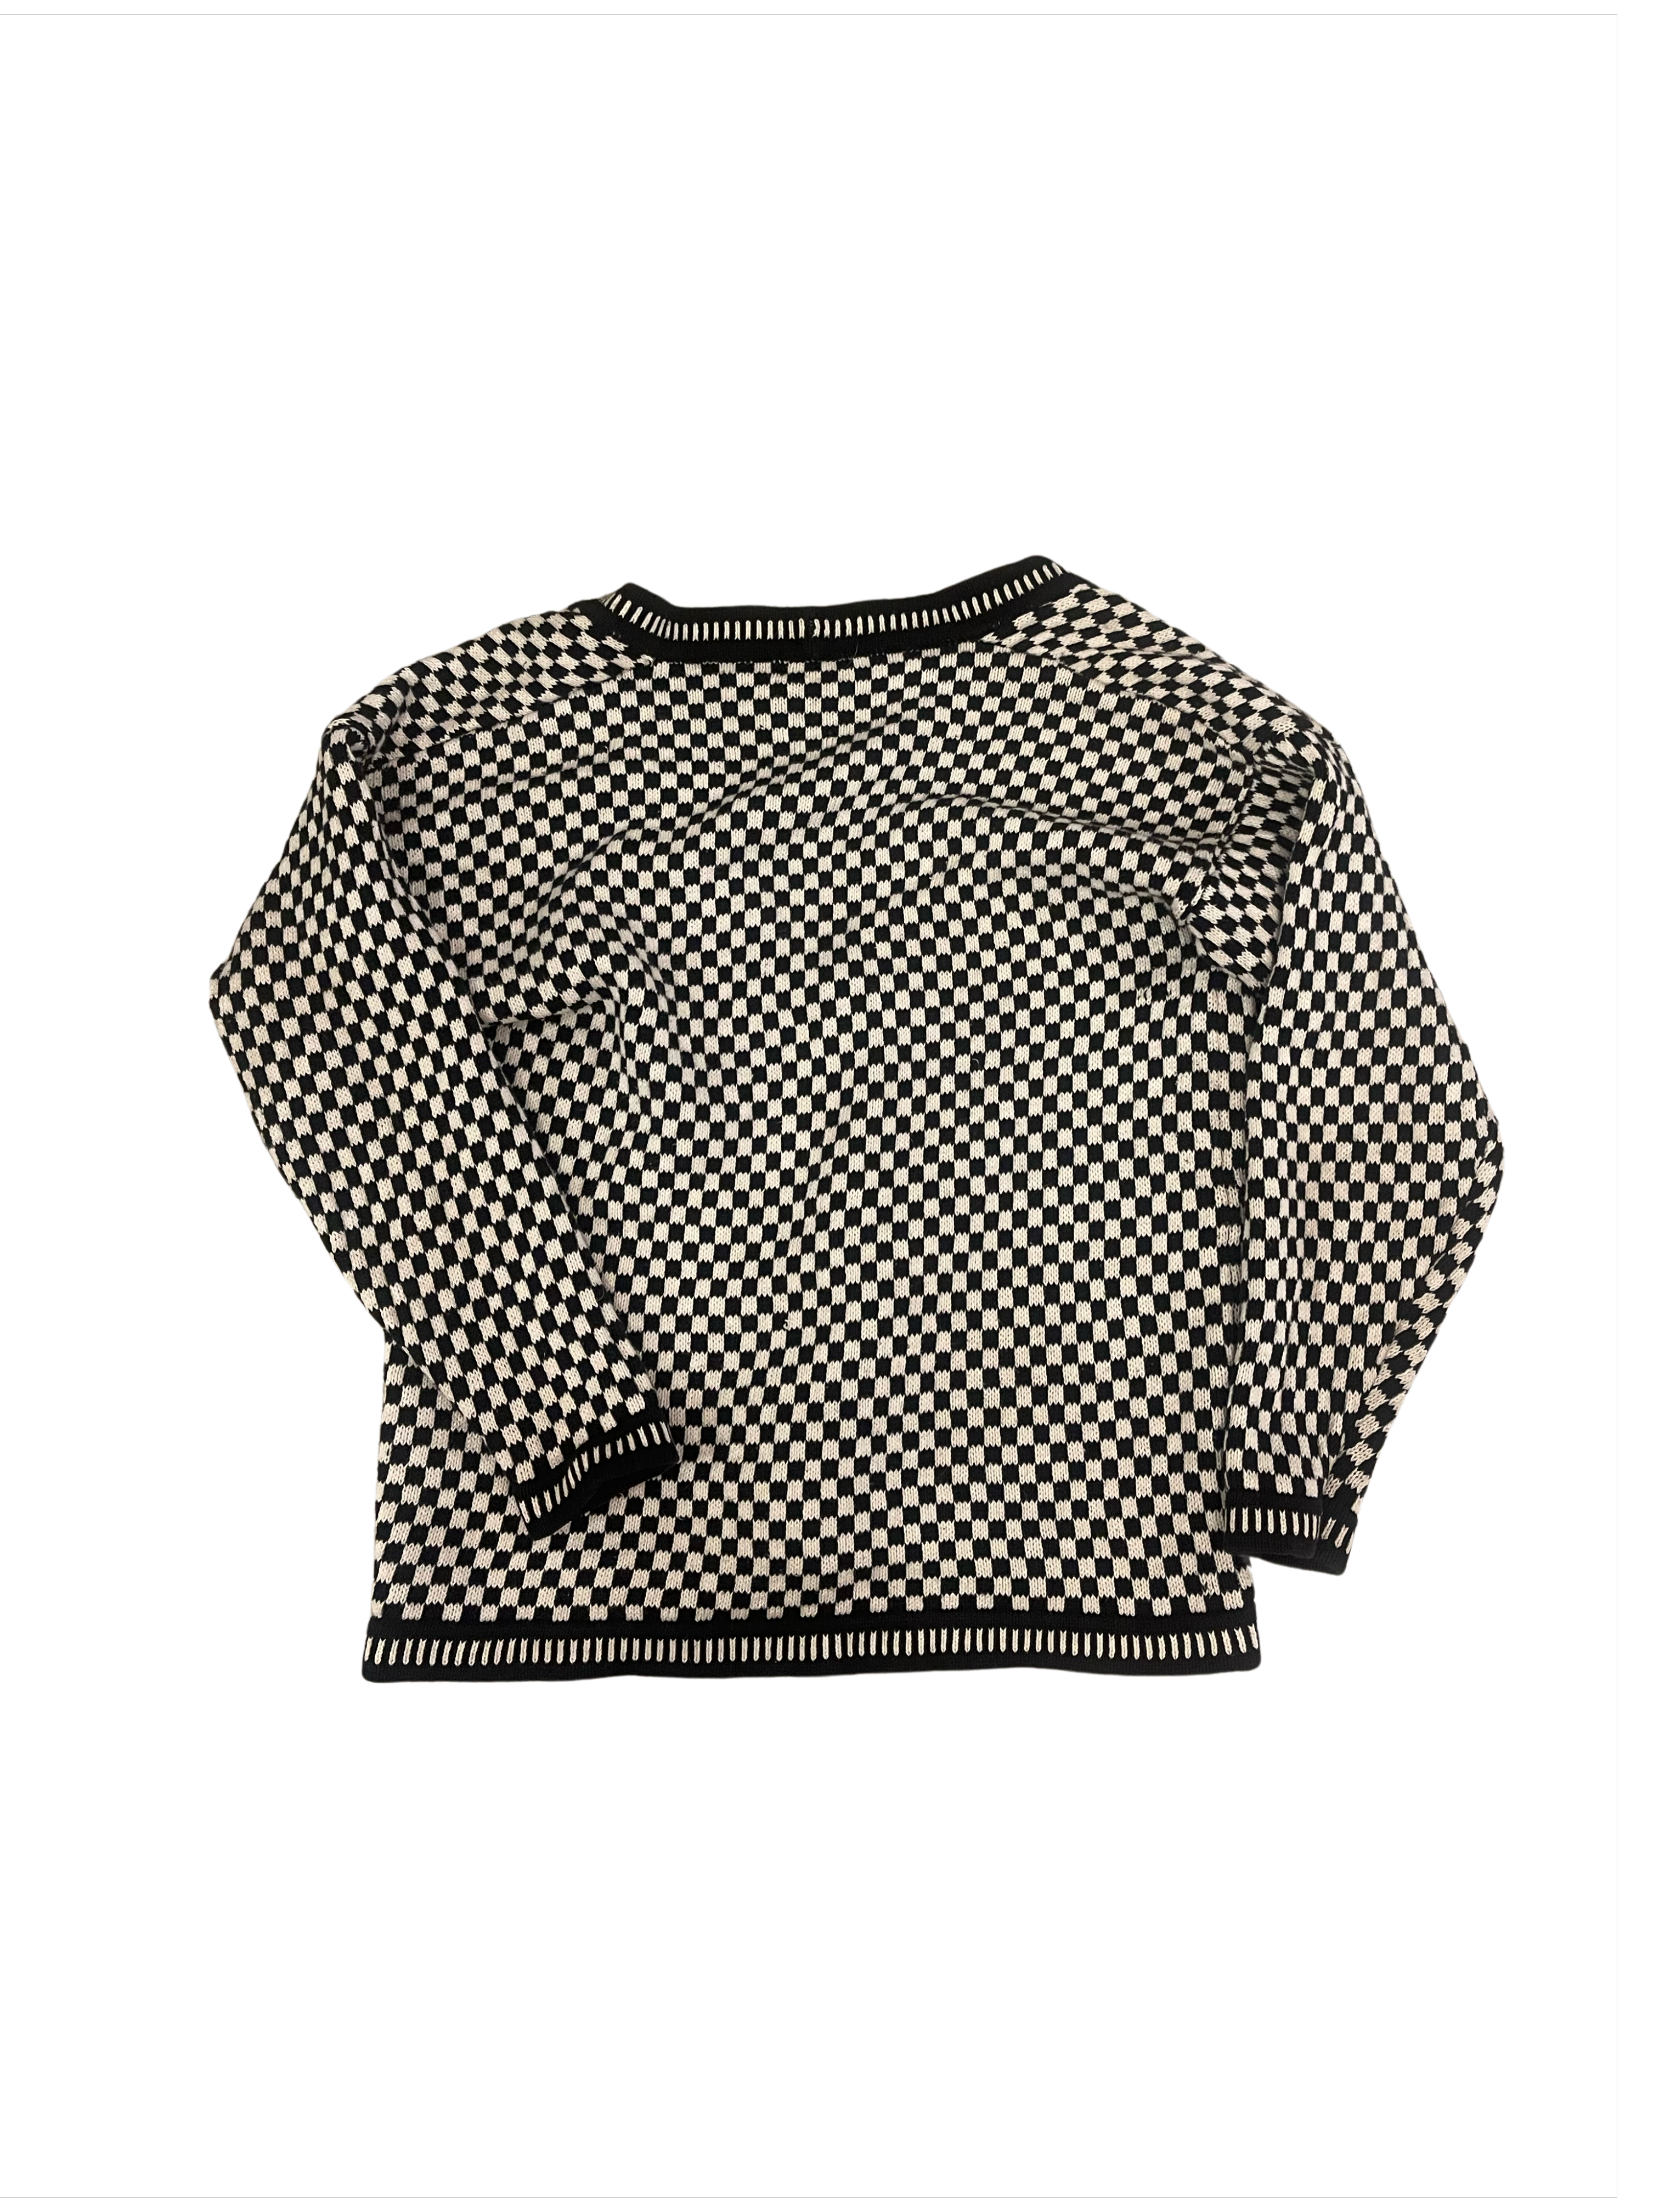 Vintage Keds Classic Black and White Checkered Long V Neck Sweater